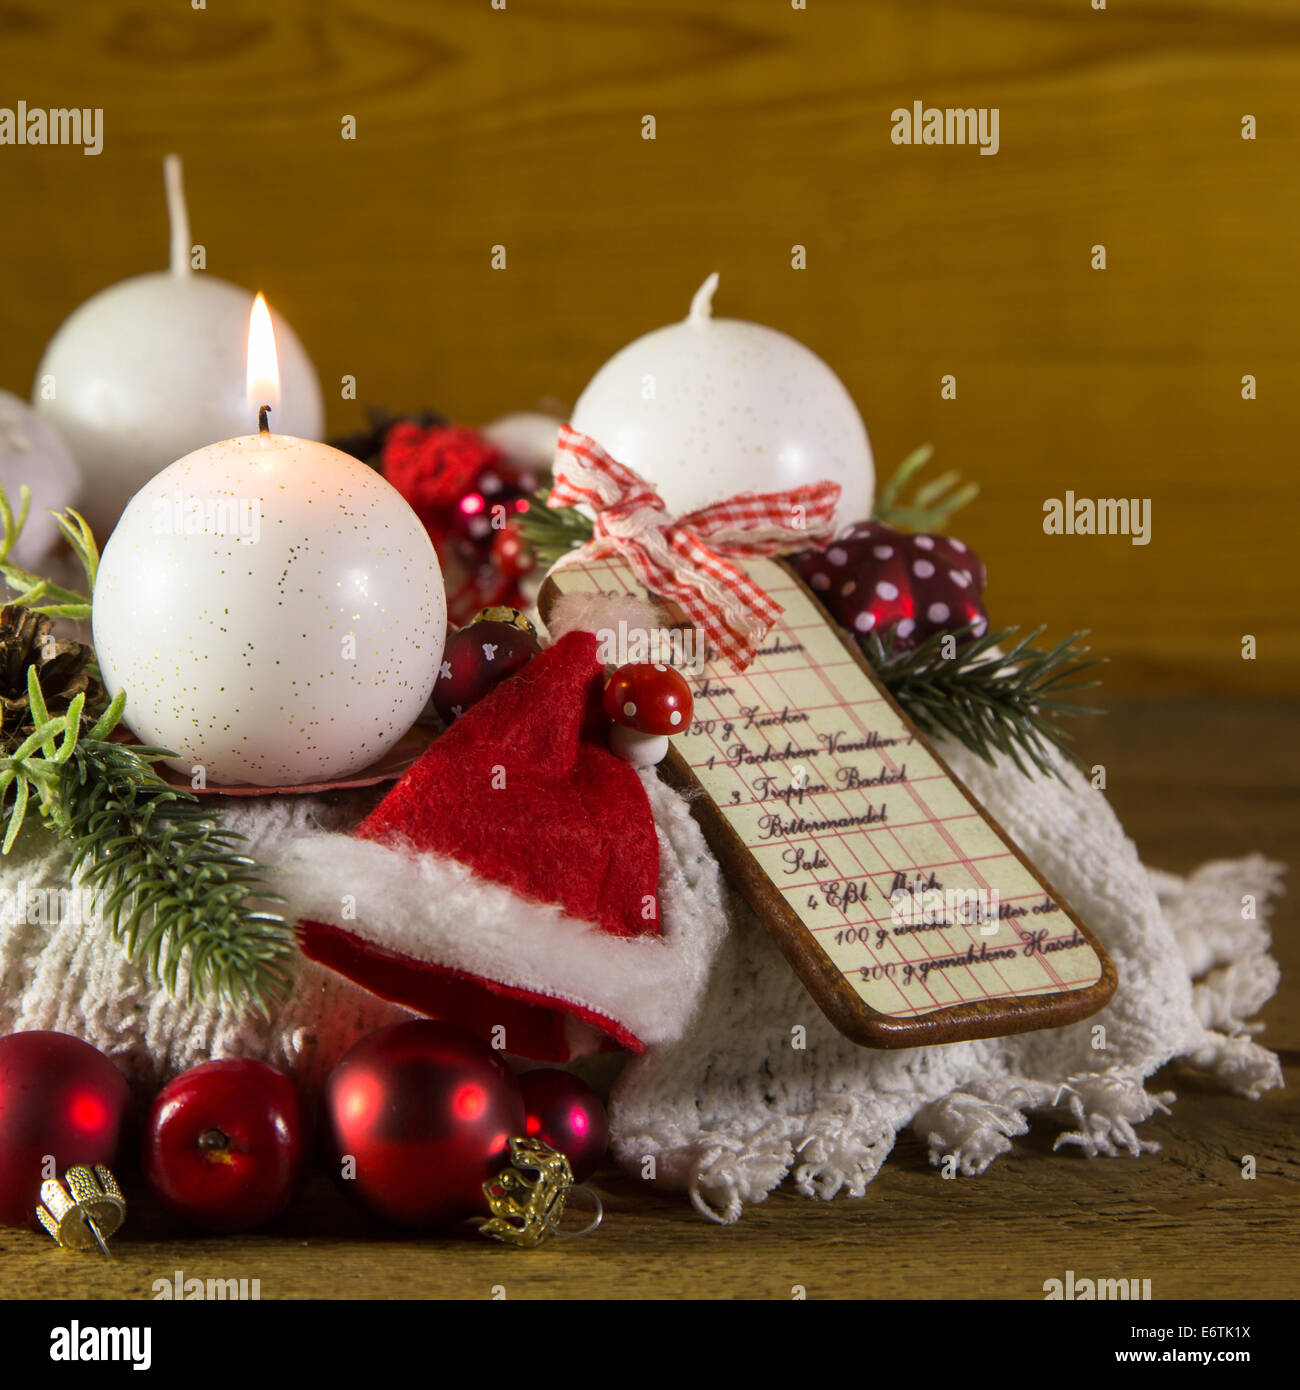 First advent with one red burning candle on the wreath. Stock Photo